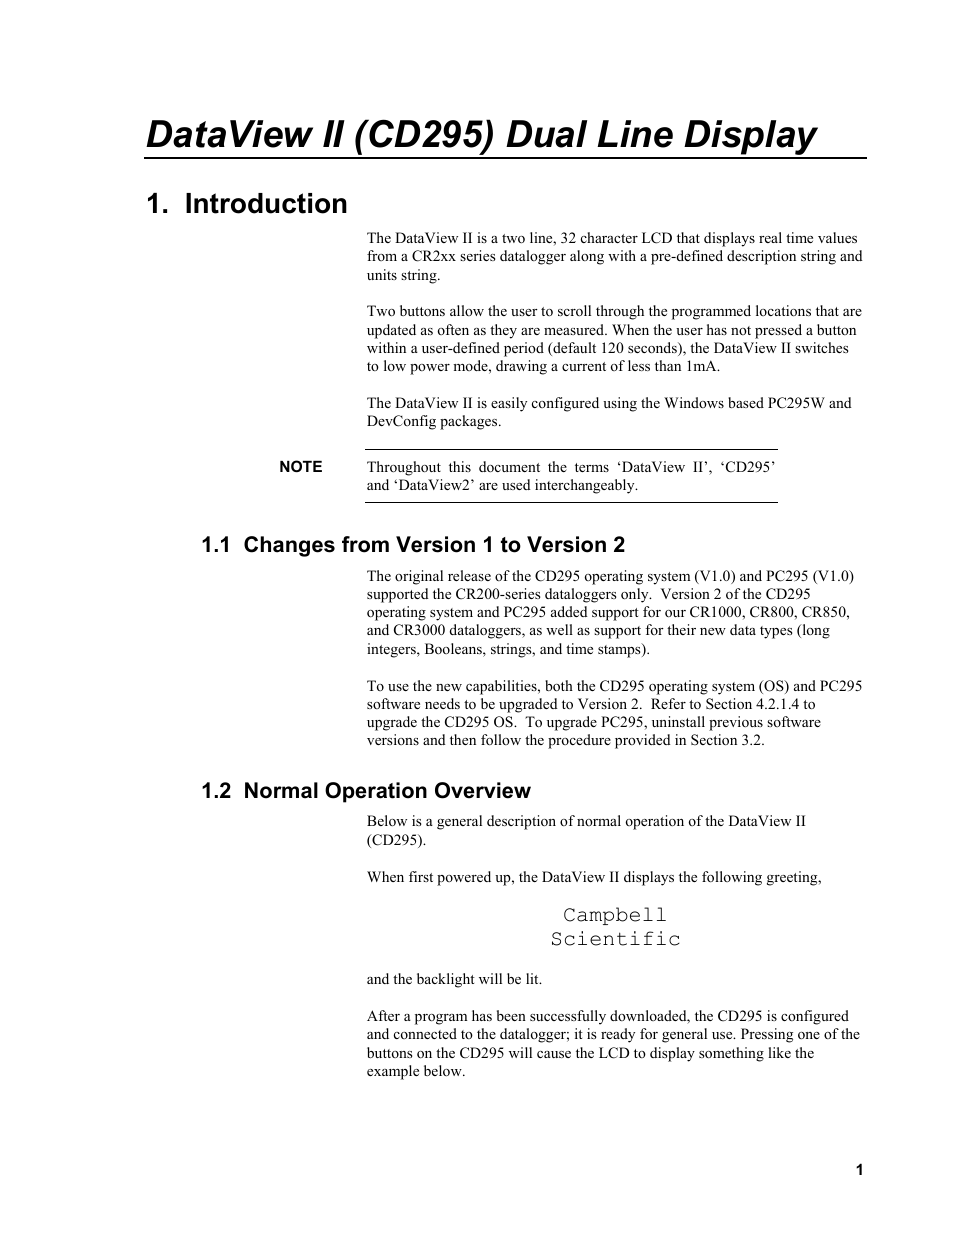 Dataview ii (cd295) dual line display, Introduction, 1 changes from version 1 to version 2 | 2 normal operation overview | Campbell Scientific CD295 DataView II Dual Line Display User Manual | Page 5 / 36